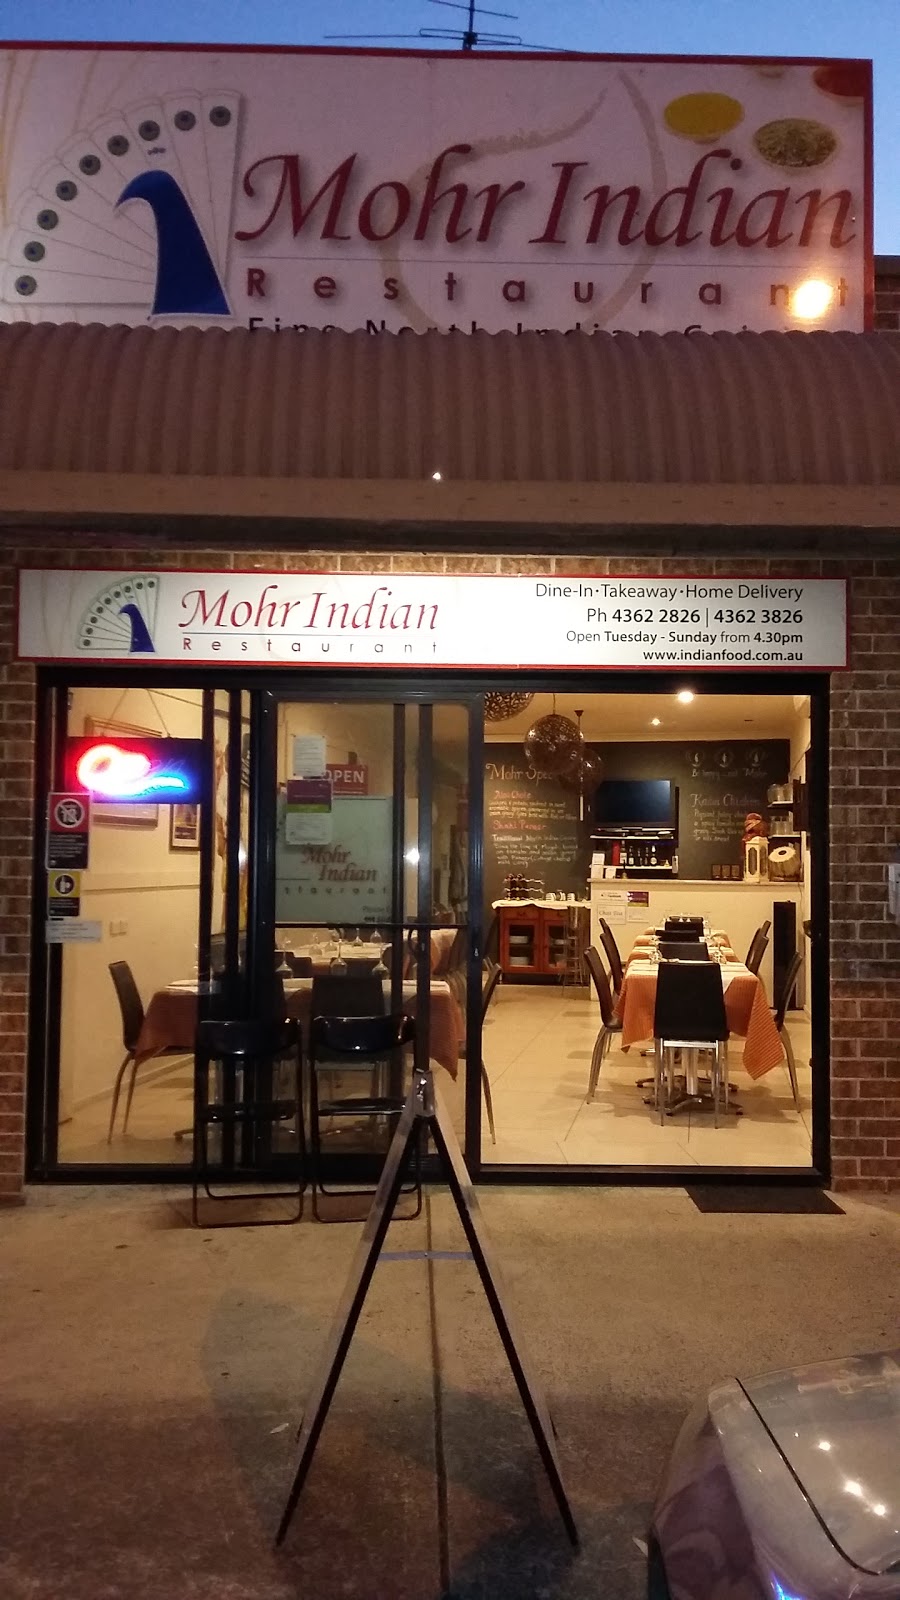 Mohr Indian Restraurant | restaurant | 2/39 Pacific Hwy, Ourimbah NSW 2258, Australia | 0243622826 OR +61 2 4362 2826